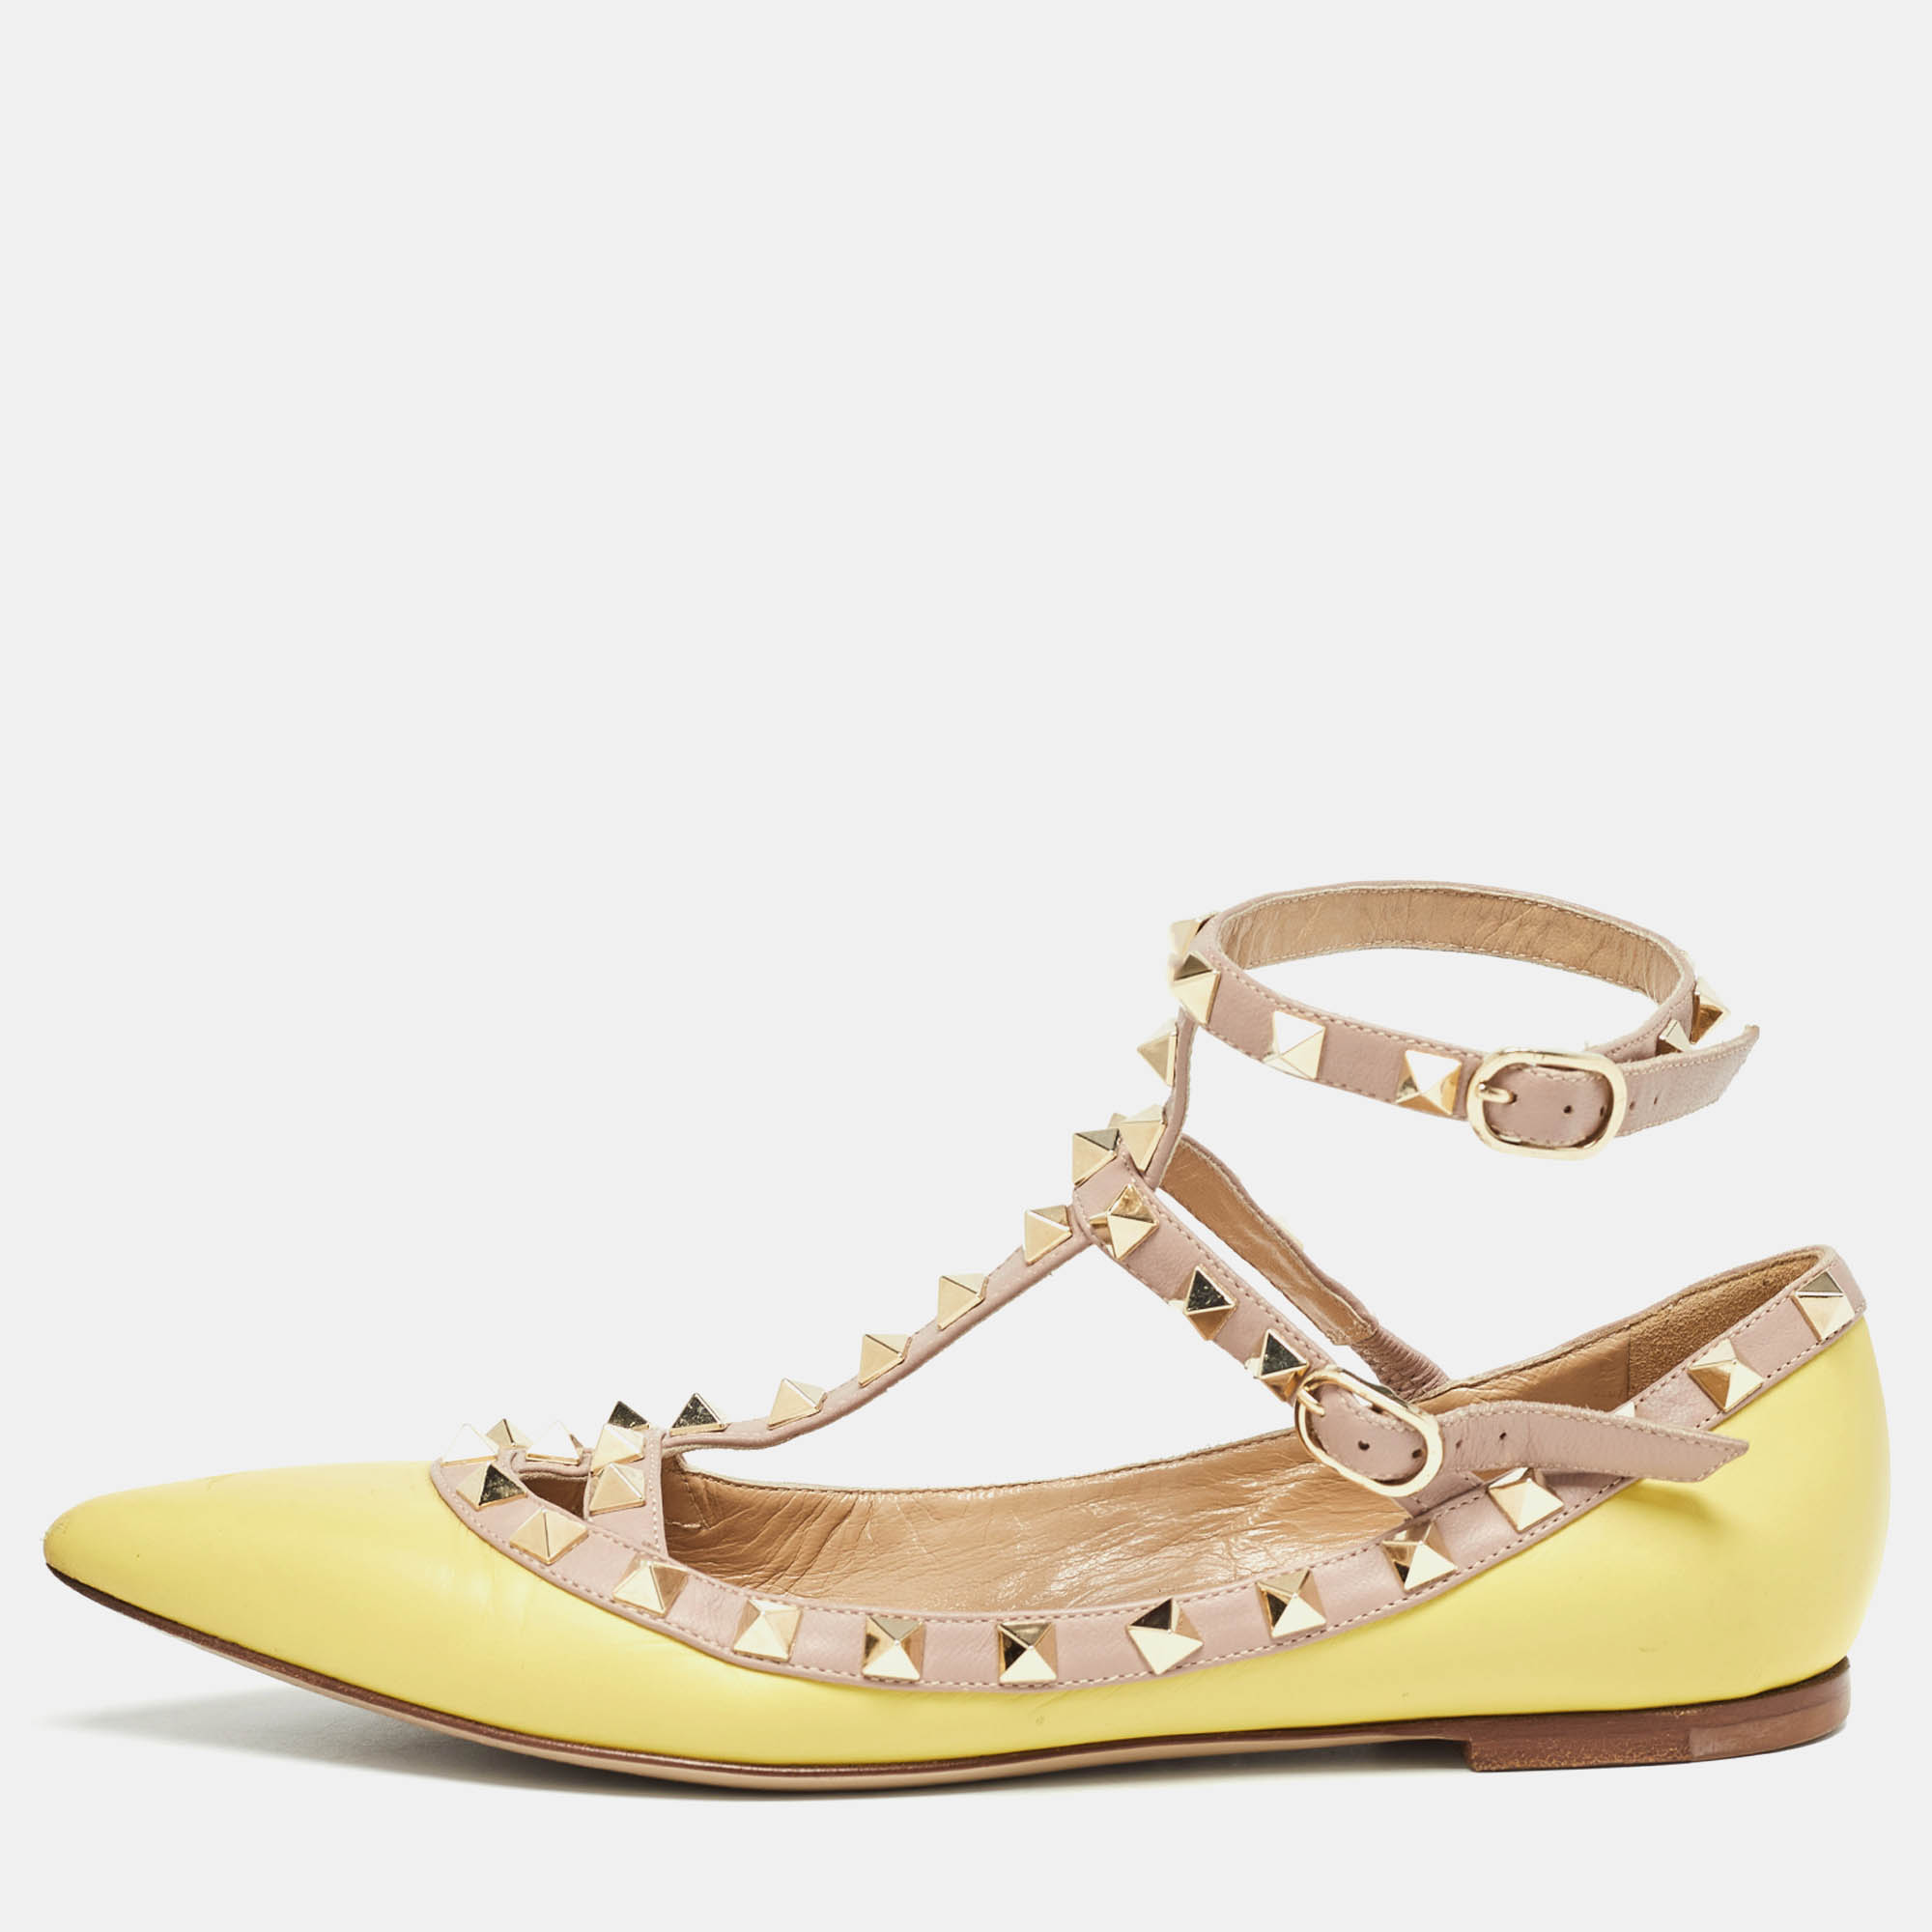 Valentino yellow leather rockstud strappy ballet flats size 36